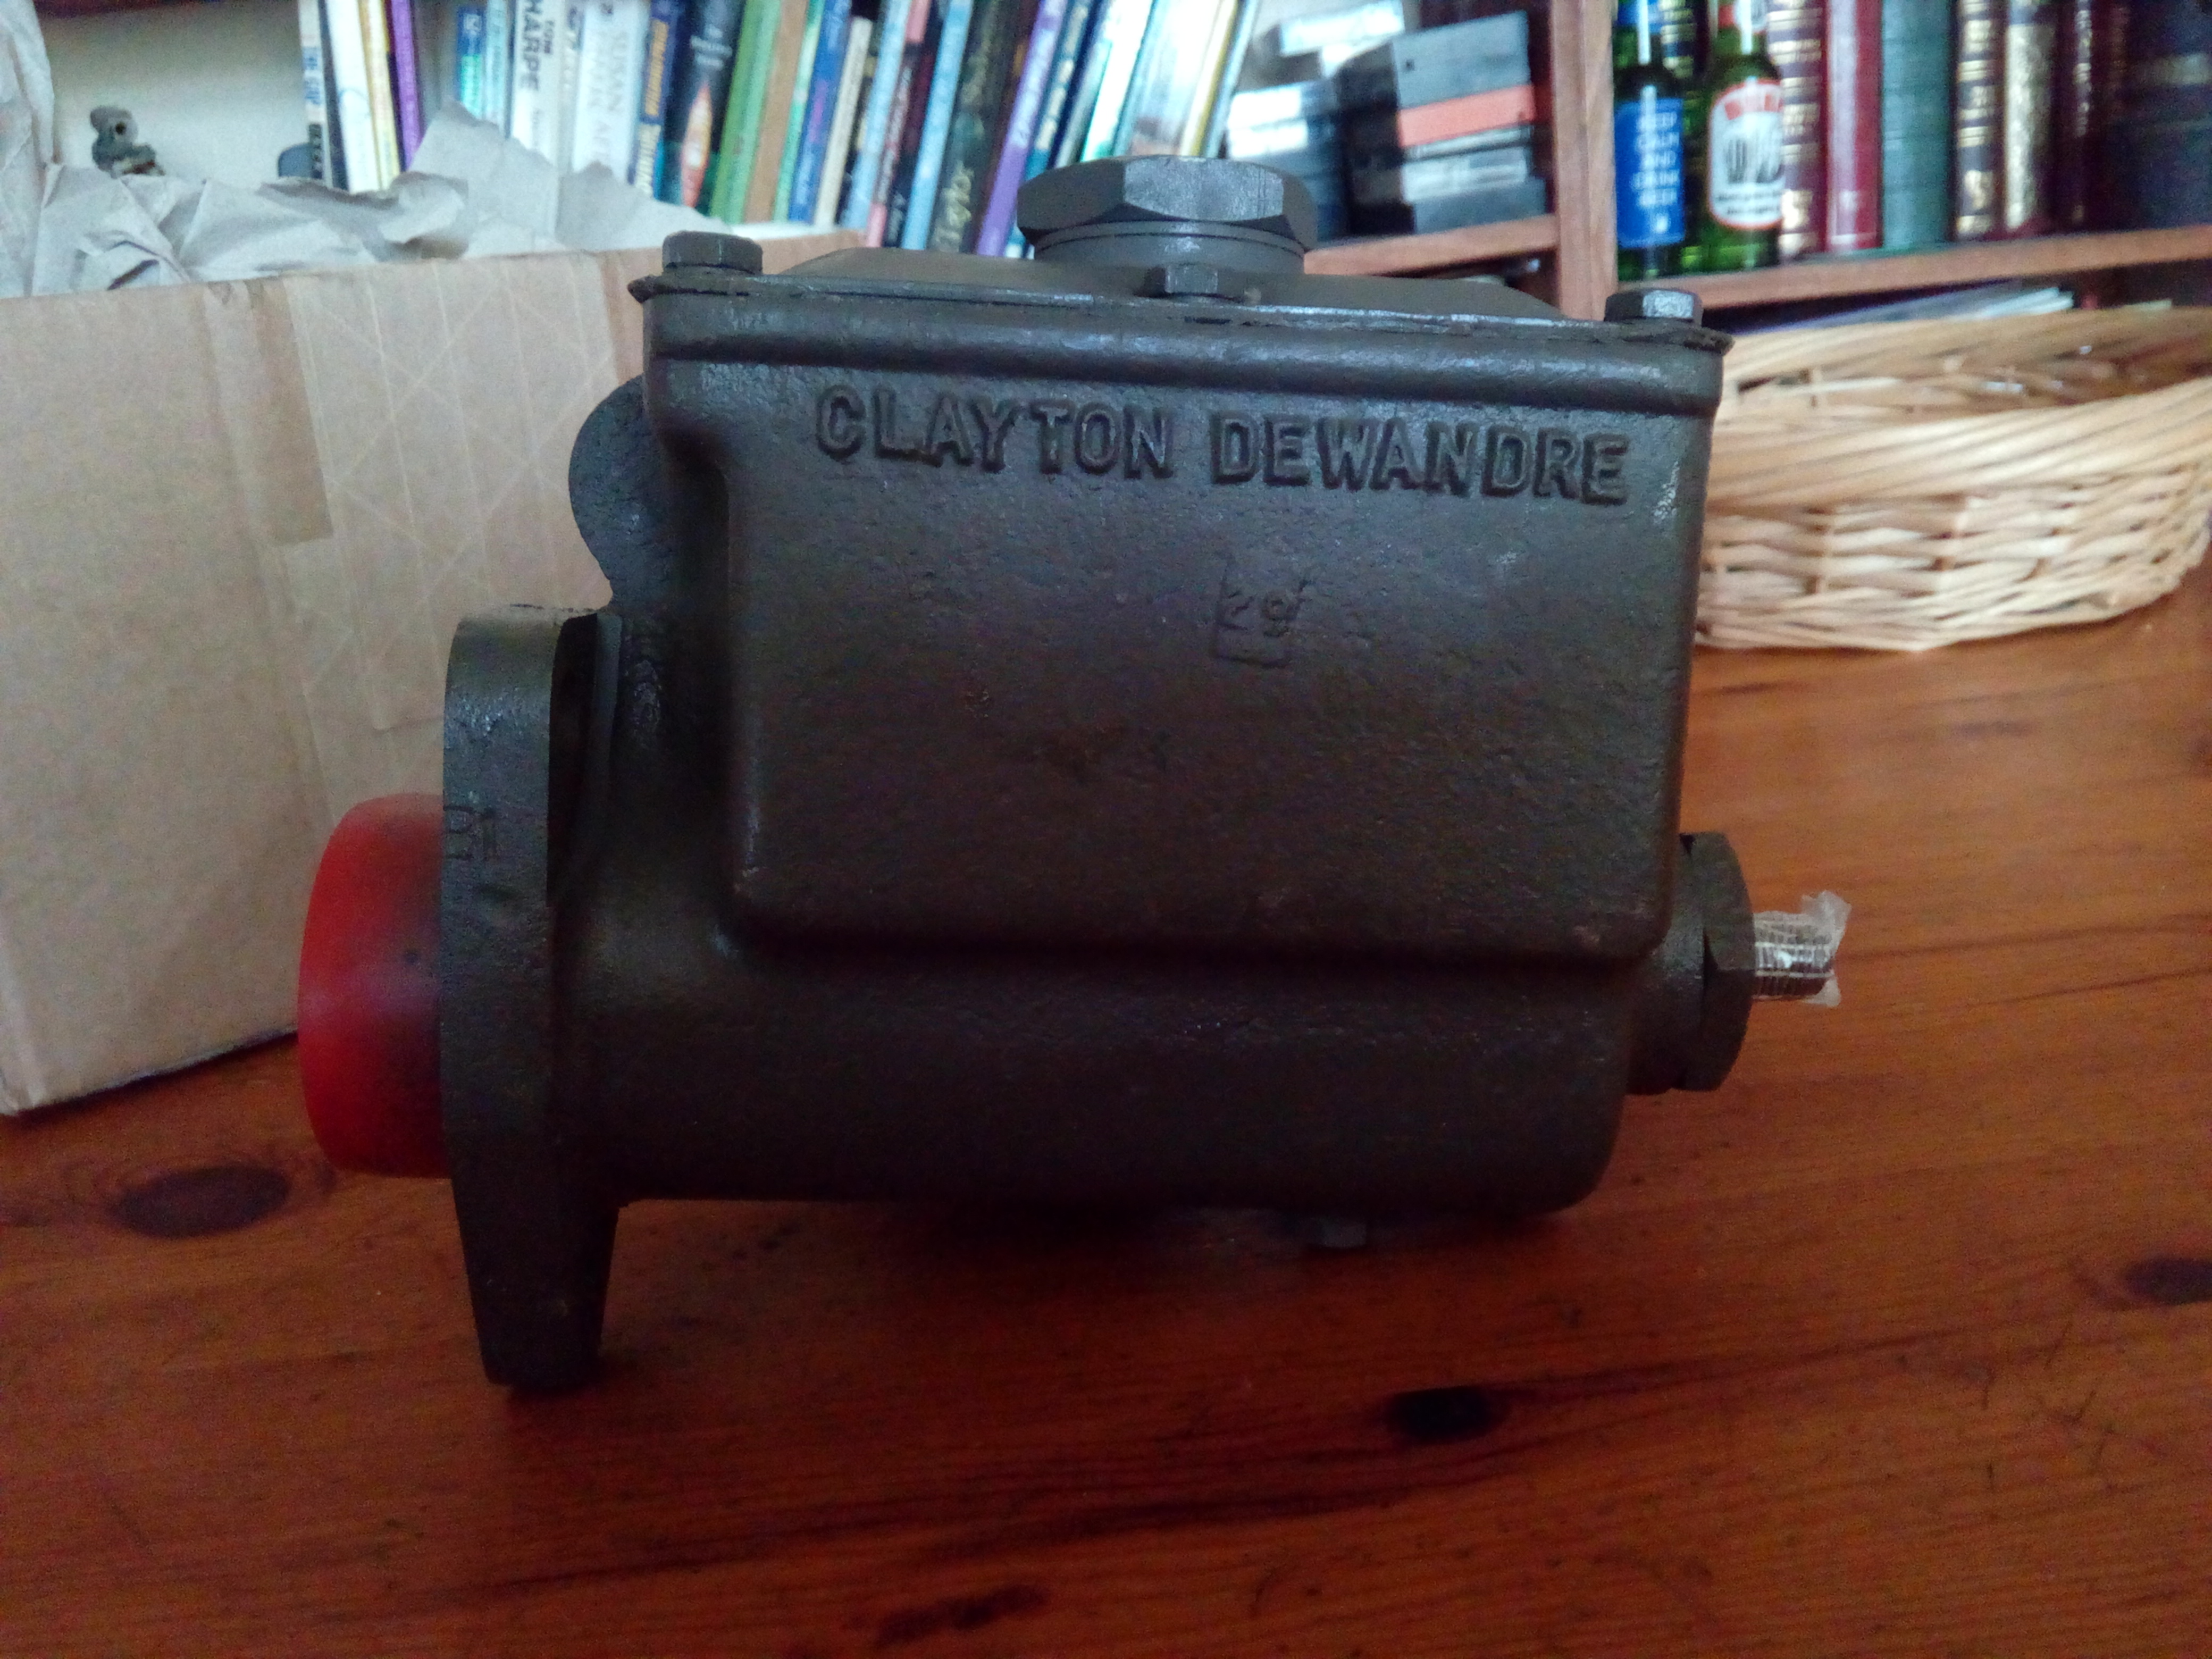 A grey-painted Clayton-Dewandre master cylinder sitting on a
wooden table. The ports are taped off.